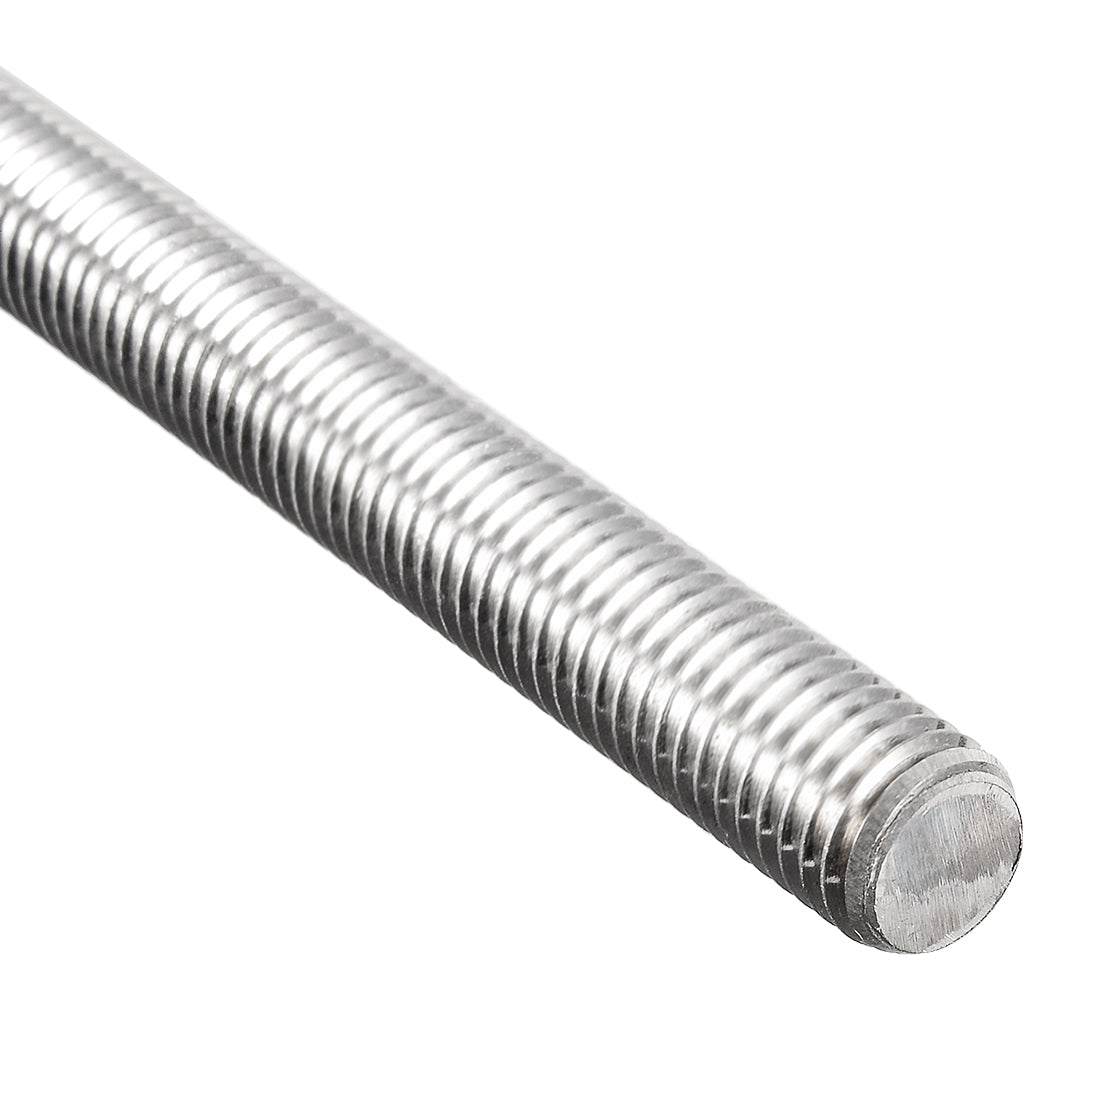 uxcell Uxcell M12 x 500mm Fully Threaded Rod 304 Stainless Steel Right Hand Threads